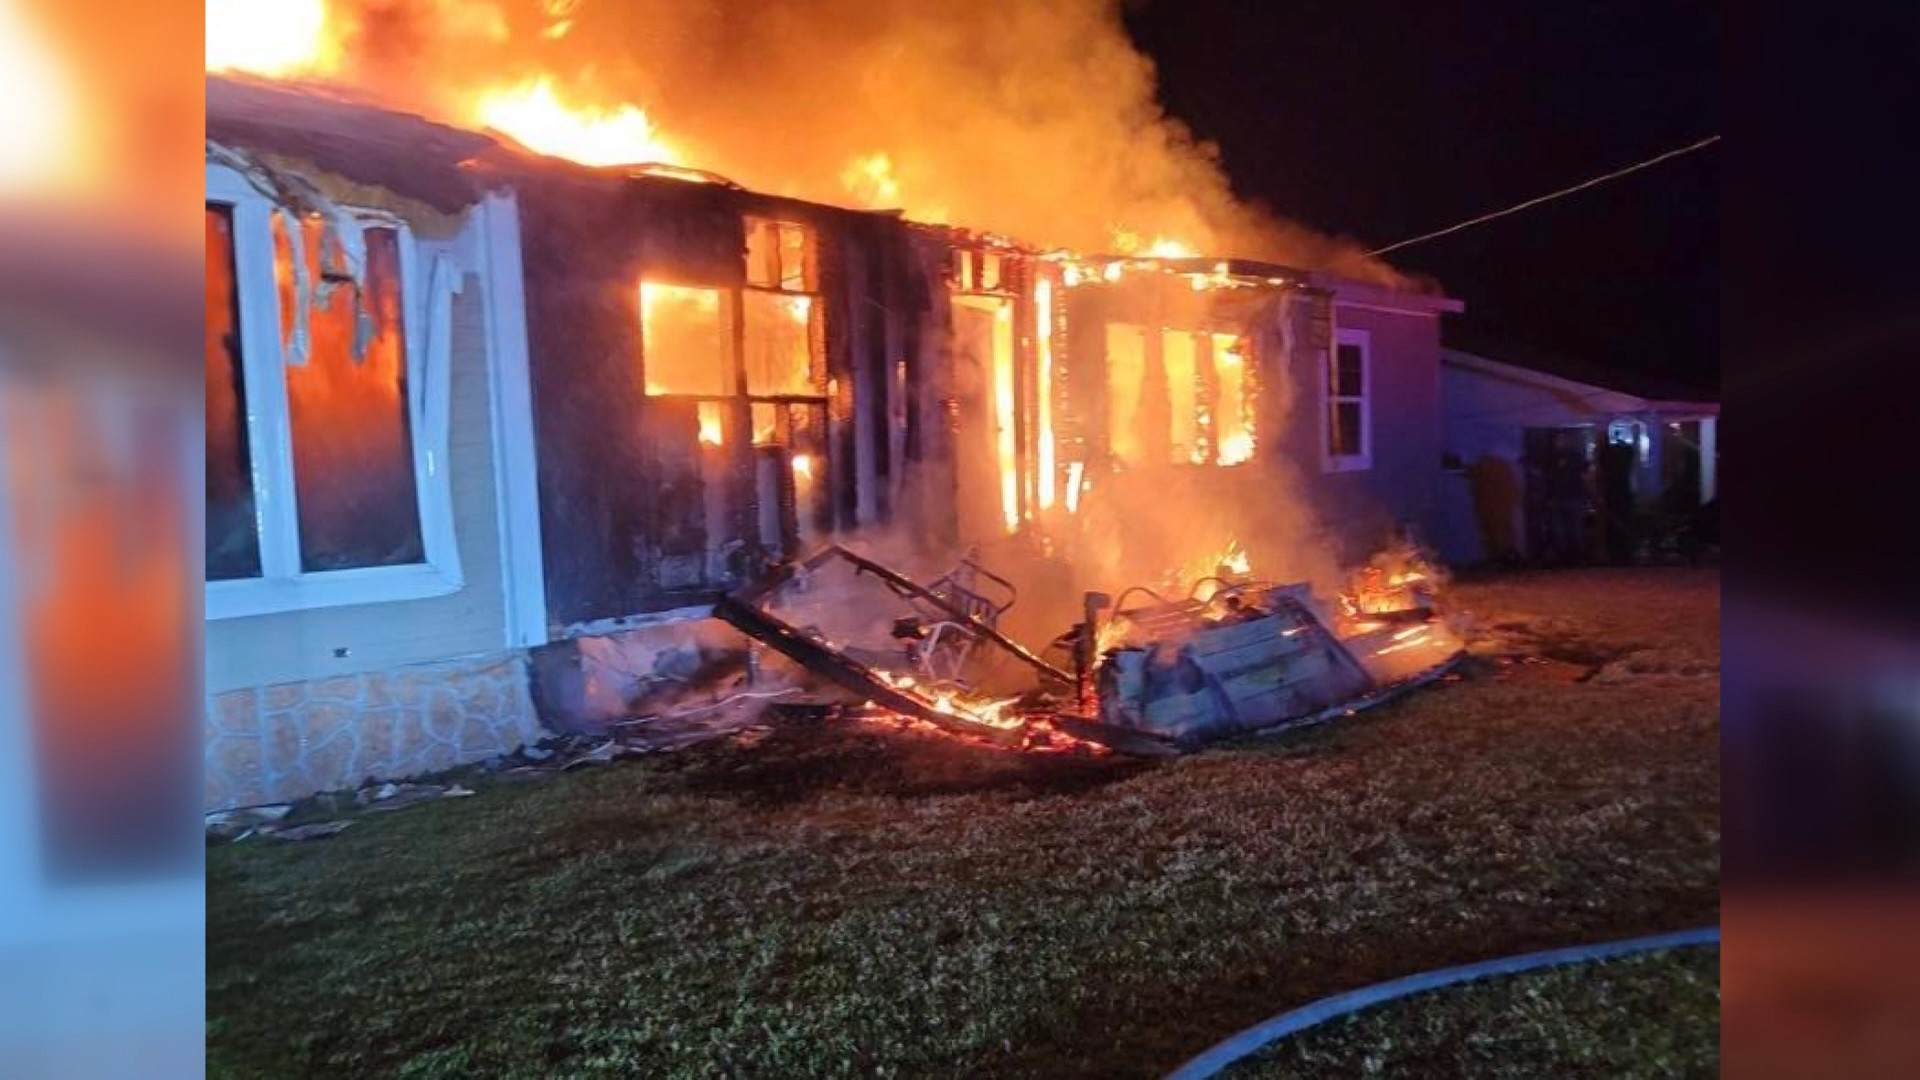 When a Mulberry family noticed their neighbor's house was on fire, they did what they could to make sure everyone inside was safe.